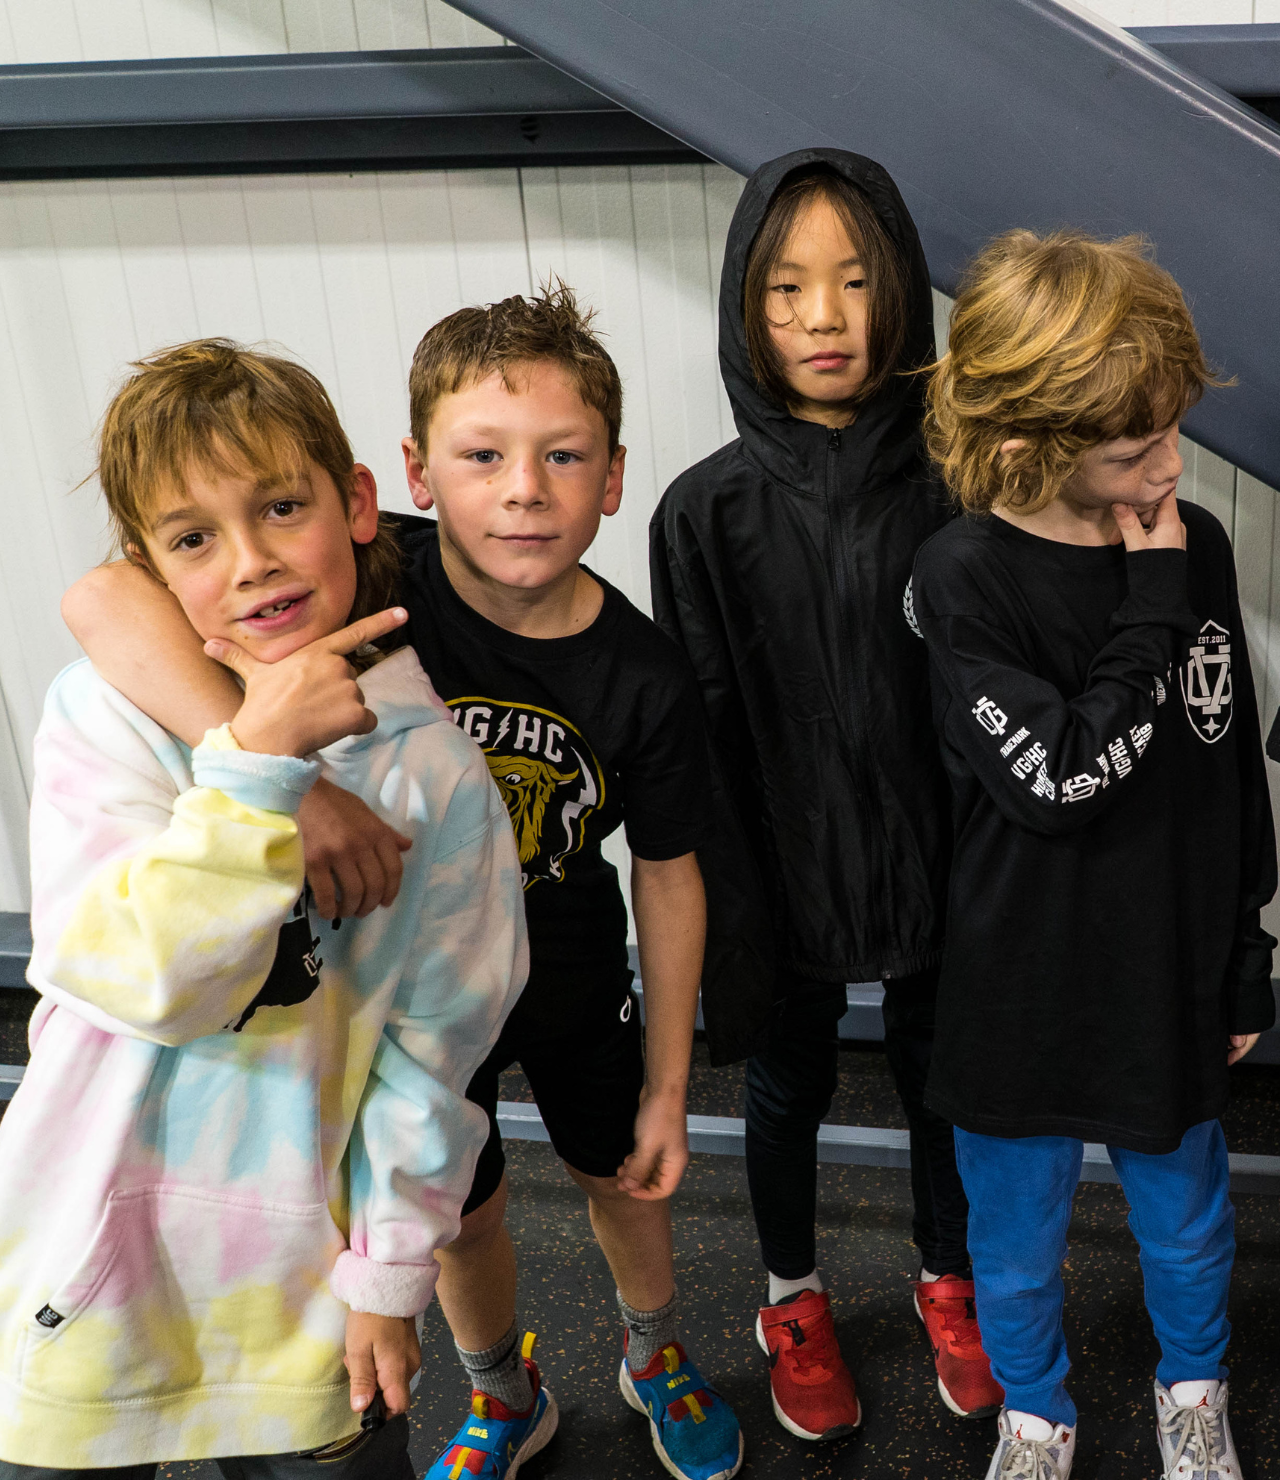 Lifetipsforbetterliving hockey clothing company - built by hockey fans for hockey fans. New kids youth apparel available today. Shop the entire youth hockey apparel collection today!